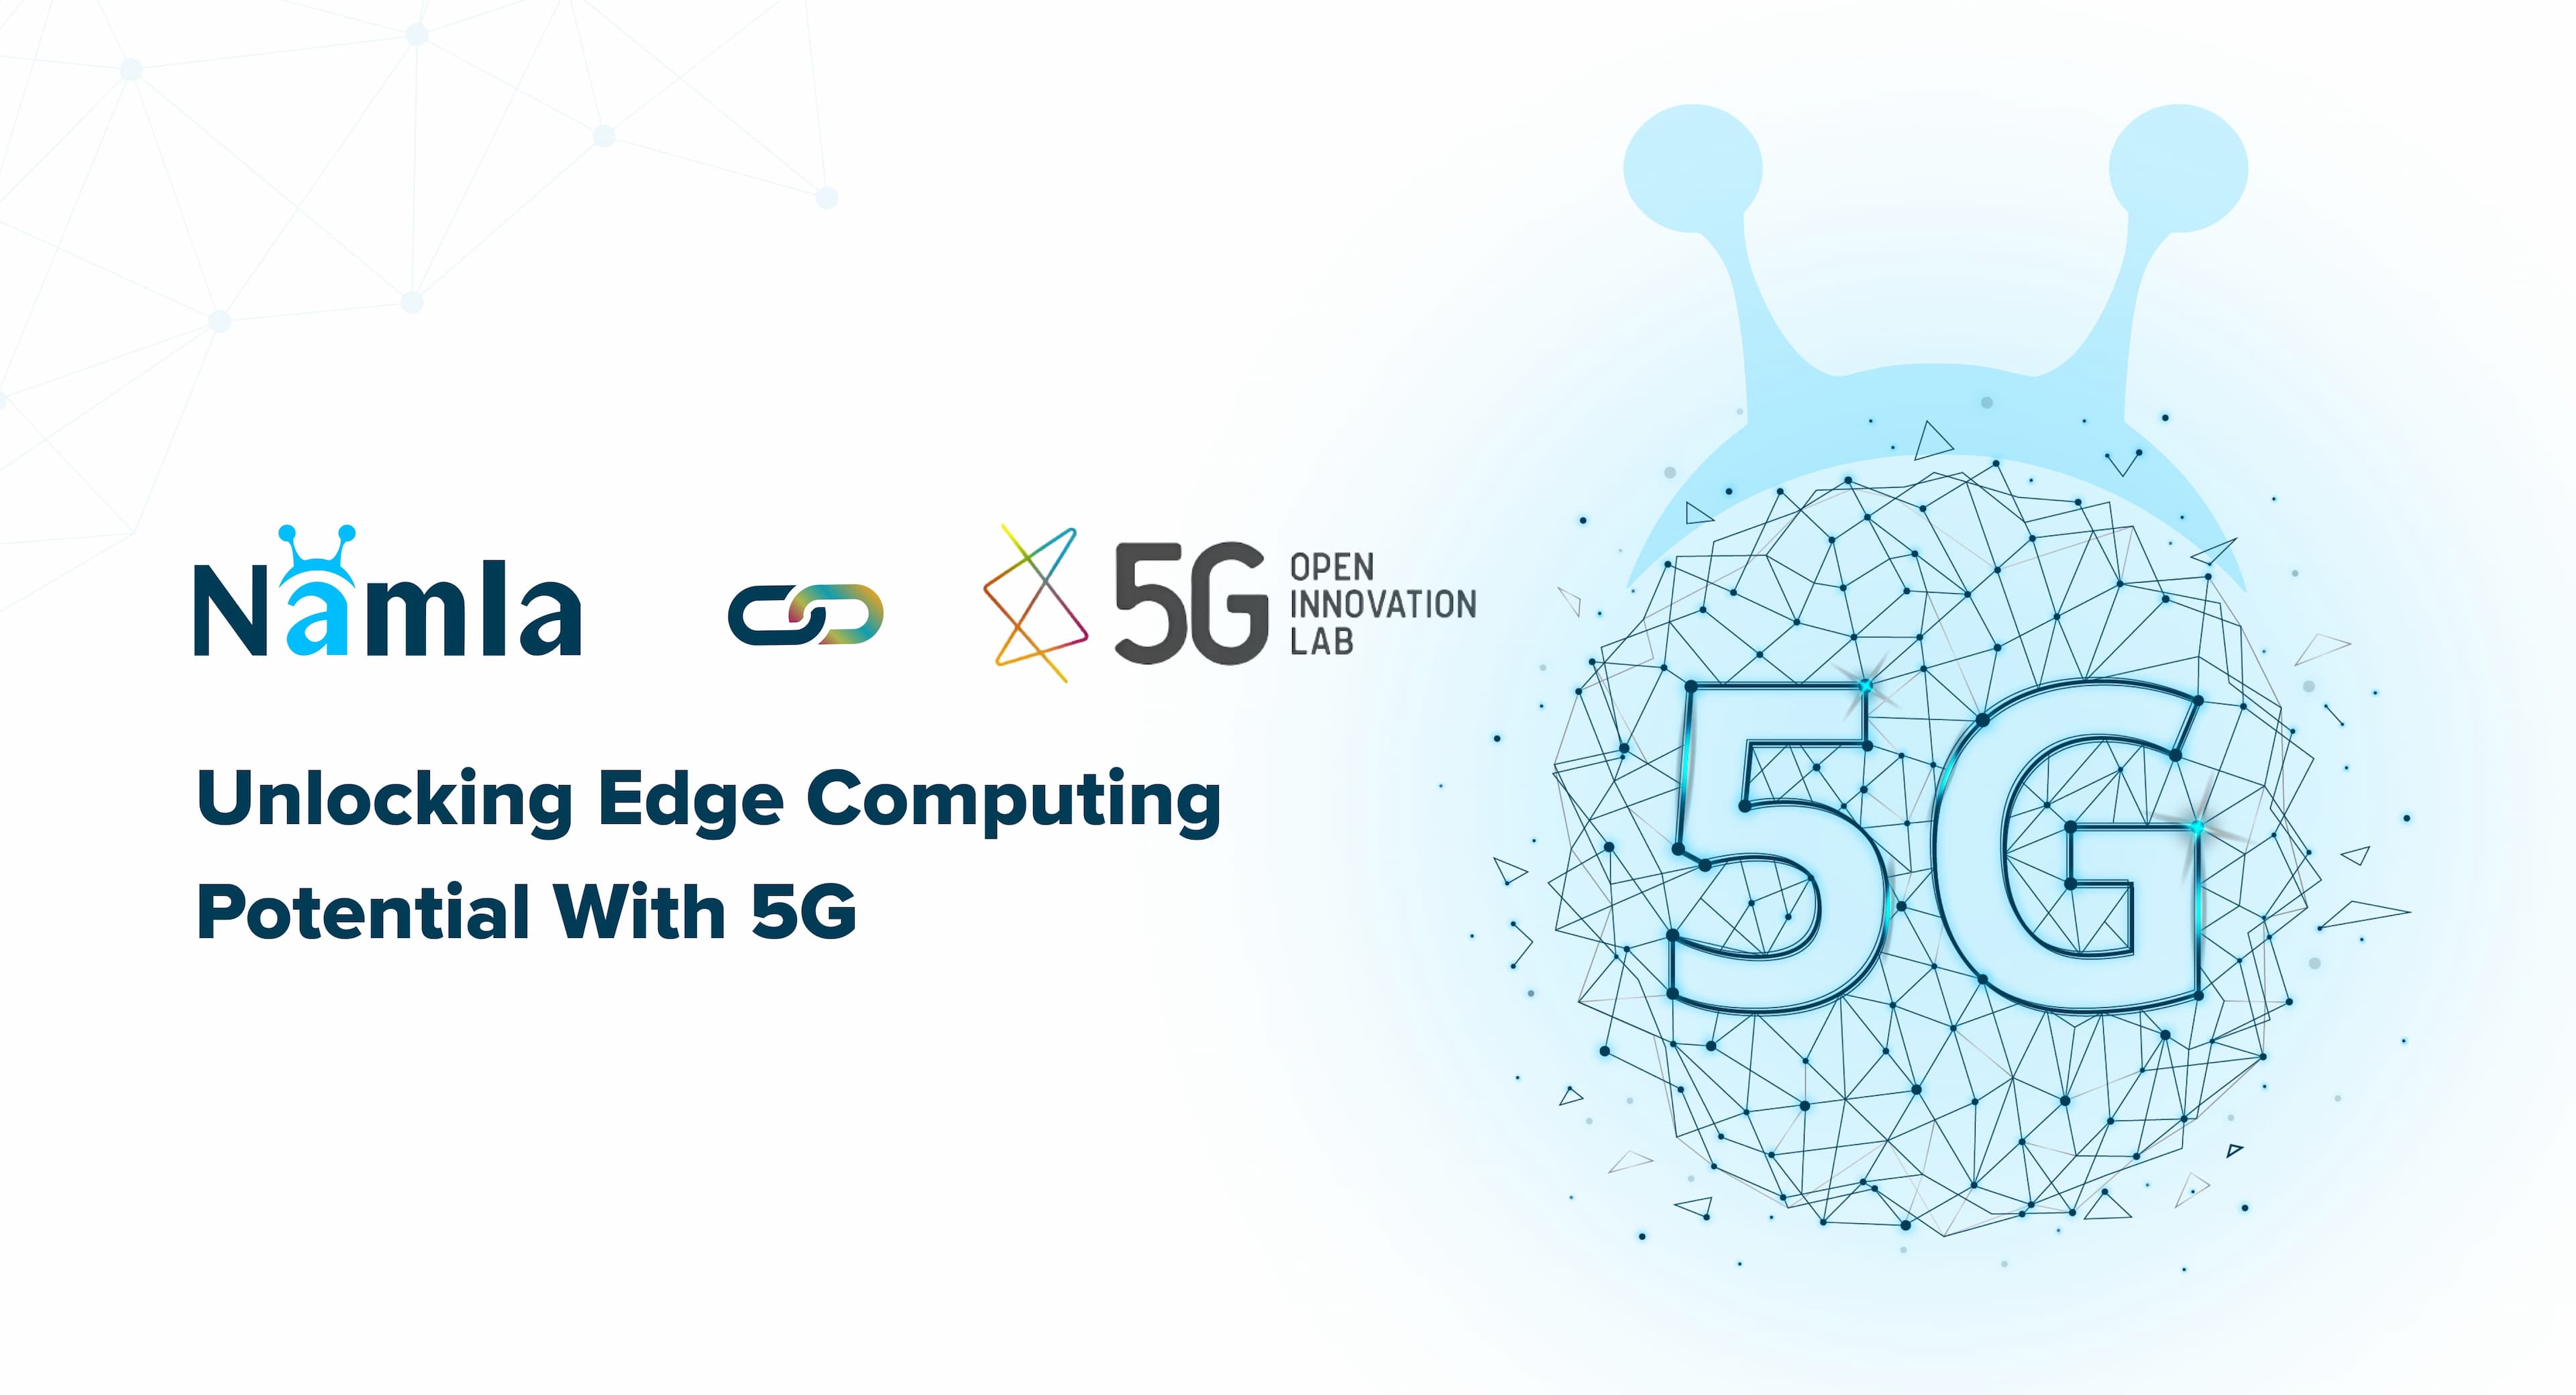 Namla Joins the 5G Open Innovation Lab Batch 8: Unlock Edge Computing with 5G